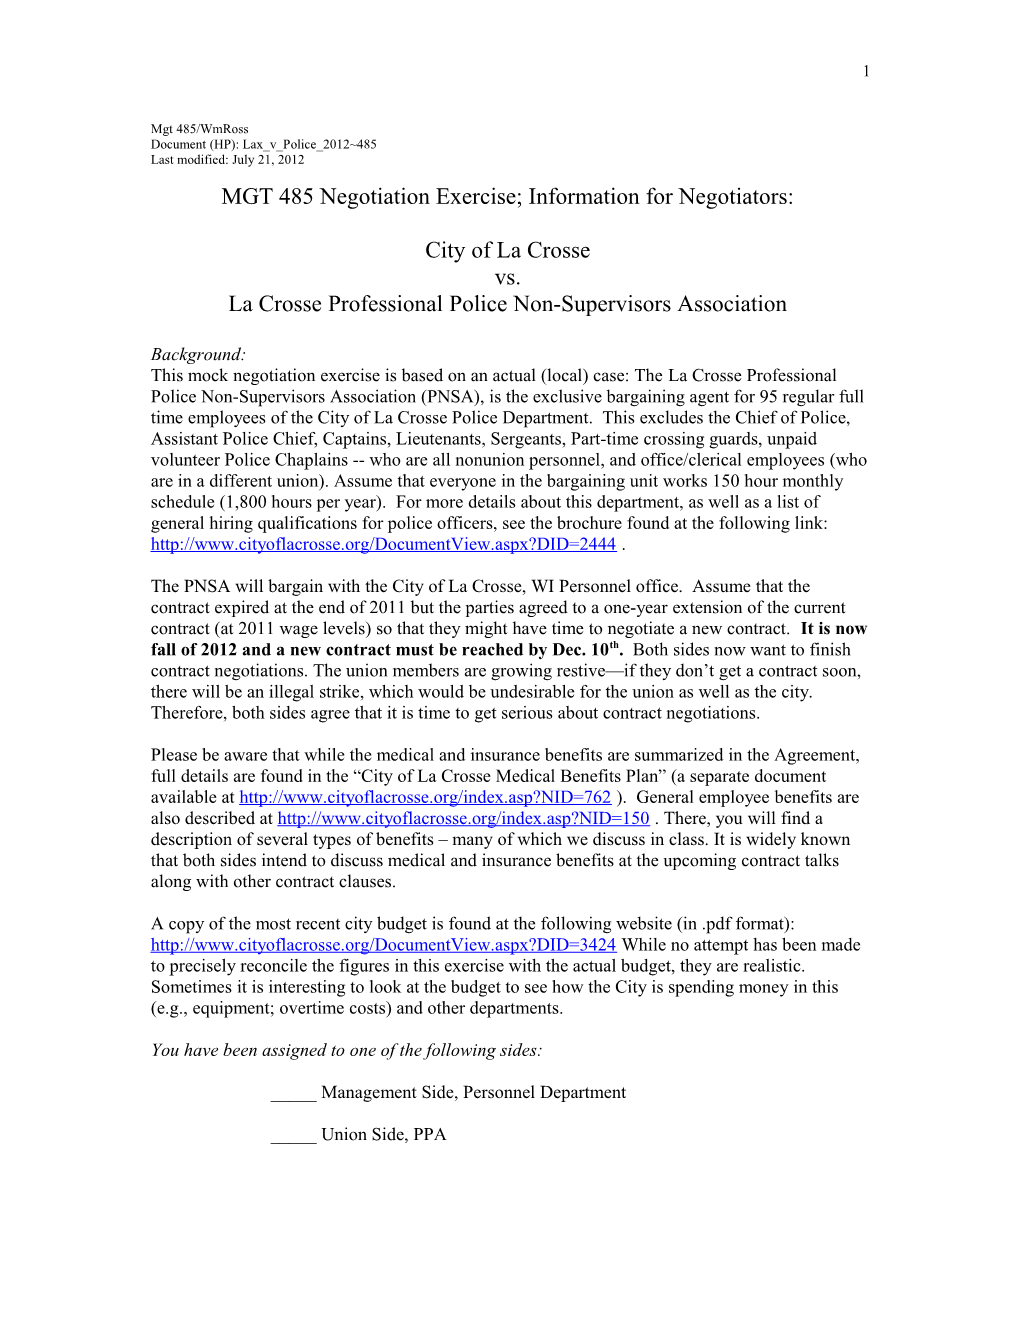 MGT 485 Negotiation Exercise; Information for Negotiators